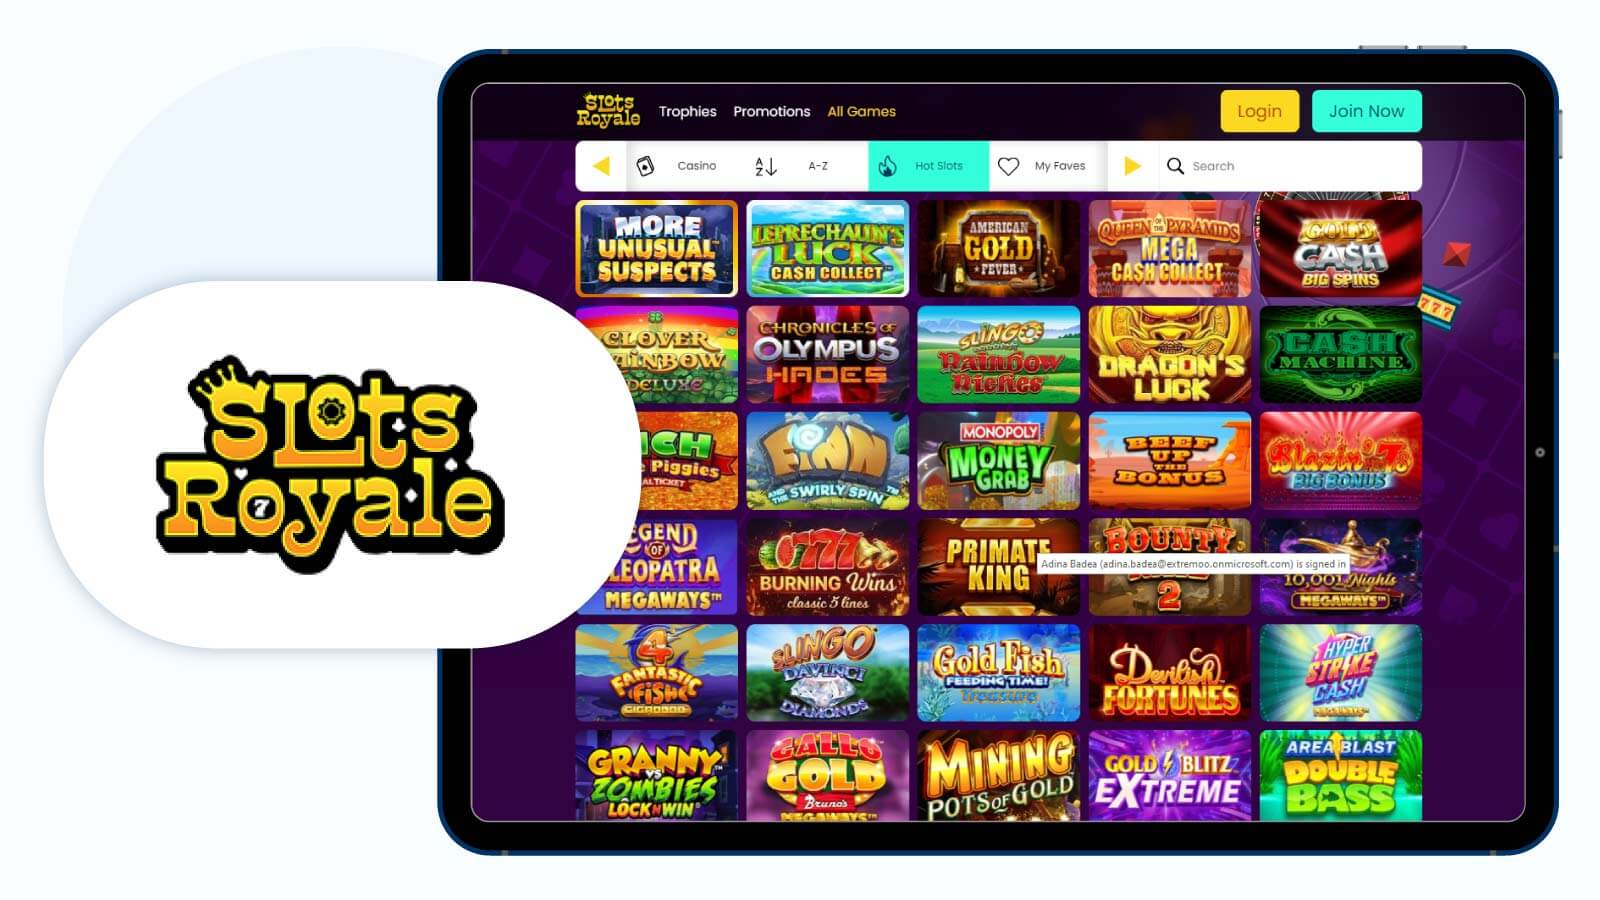 Slots Royale – Our Recommended Jumpman Casino for Big Bass Splash